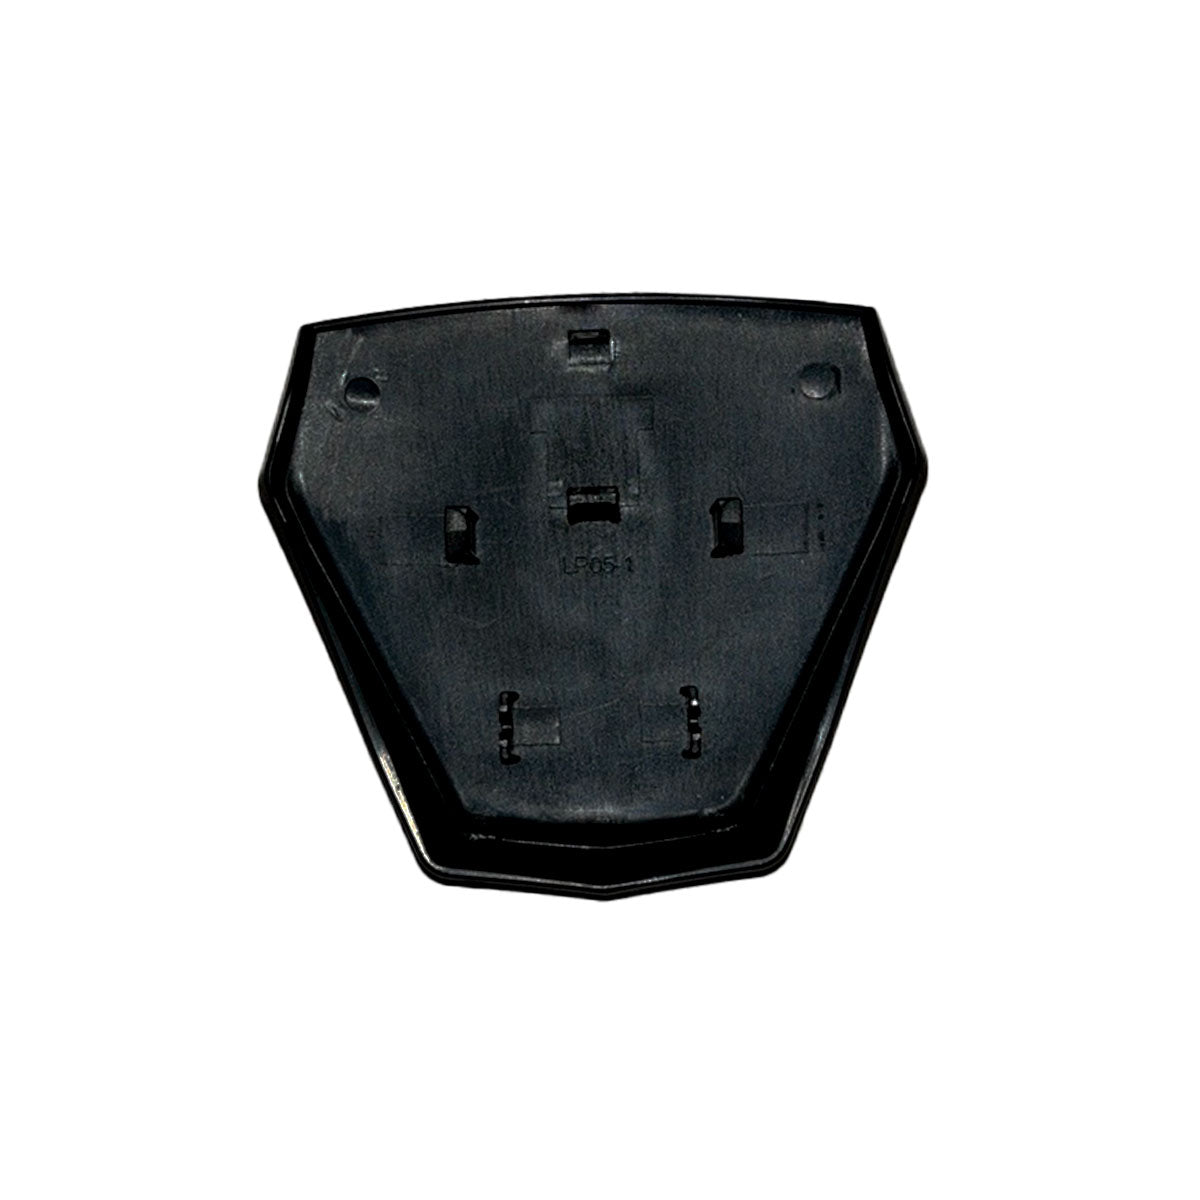 Top Vent Cover for Delta R4 Helmets